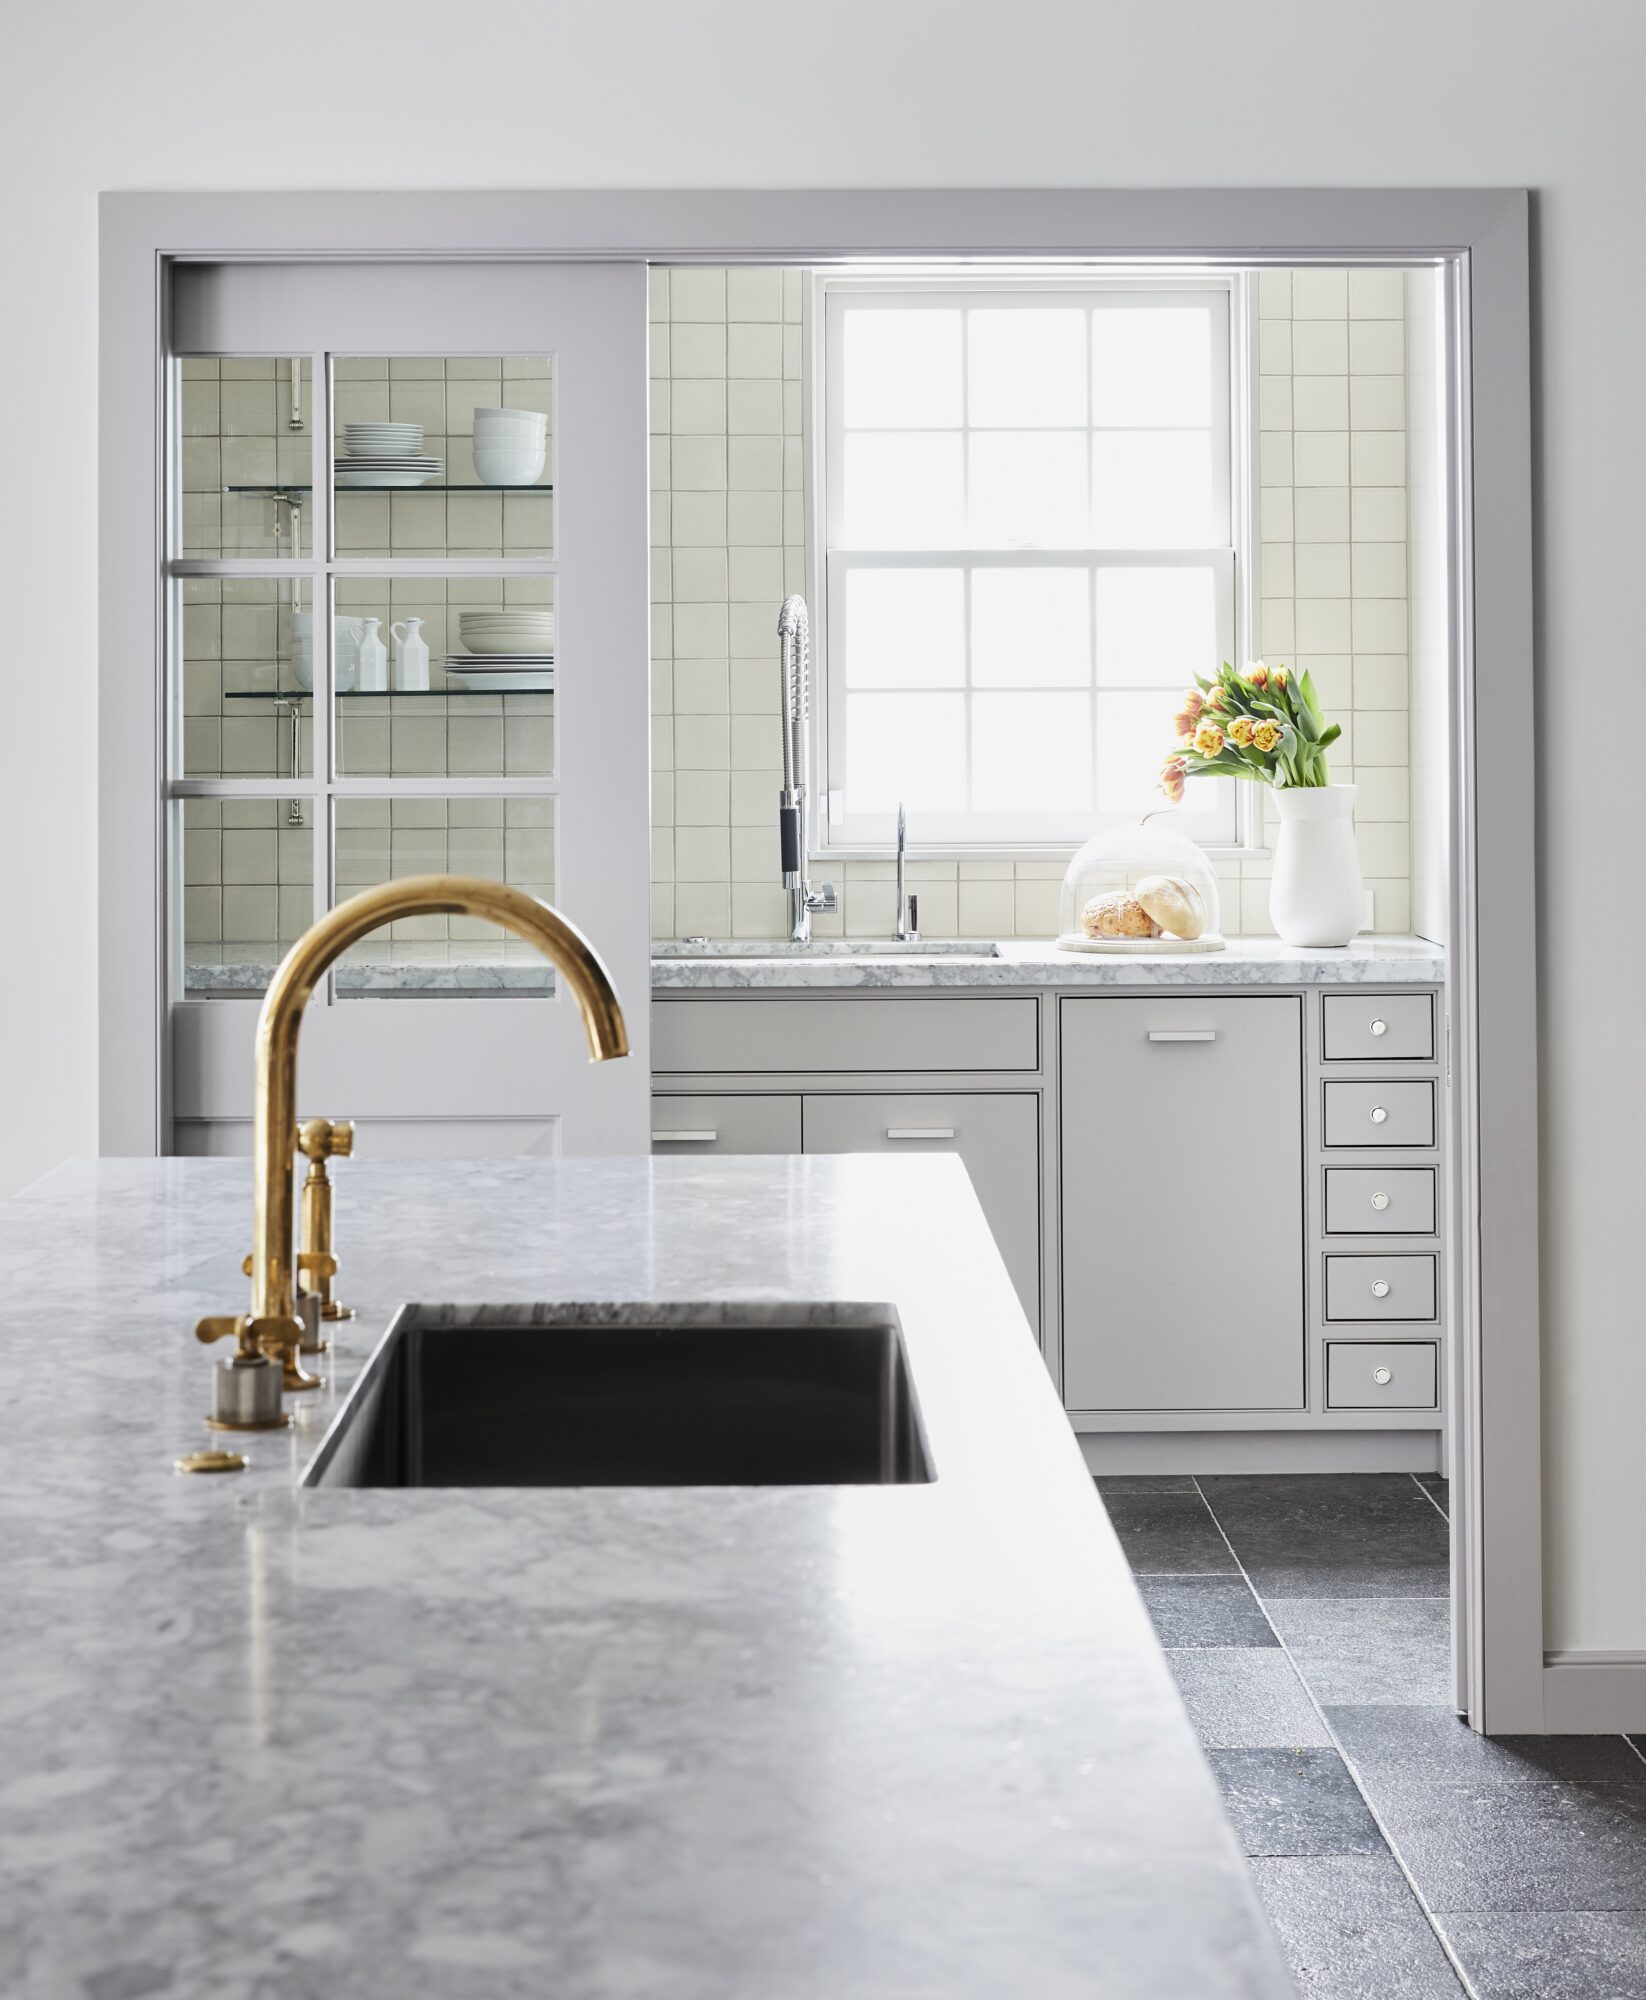 white kitchen pantry with golden faucet, grey marble sink and shelves